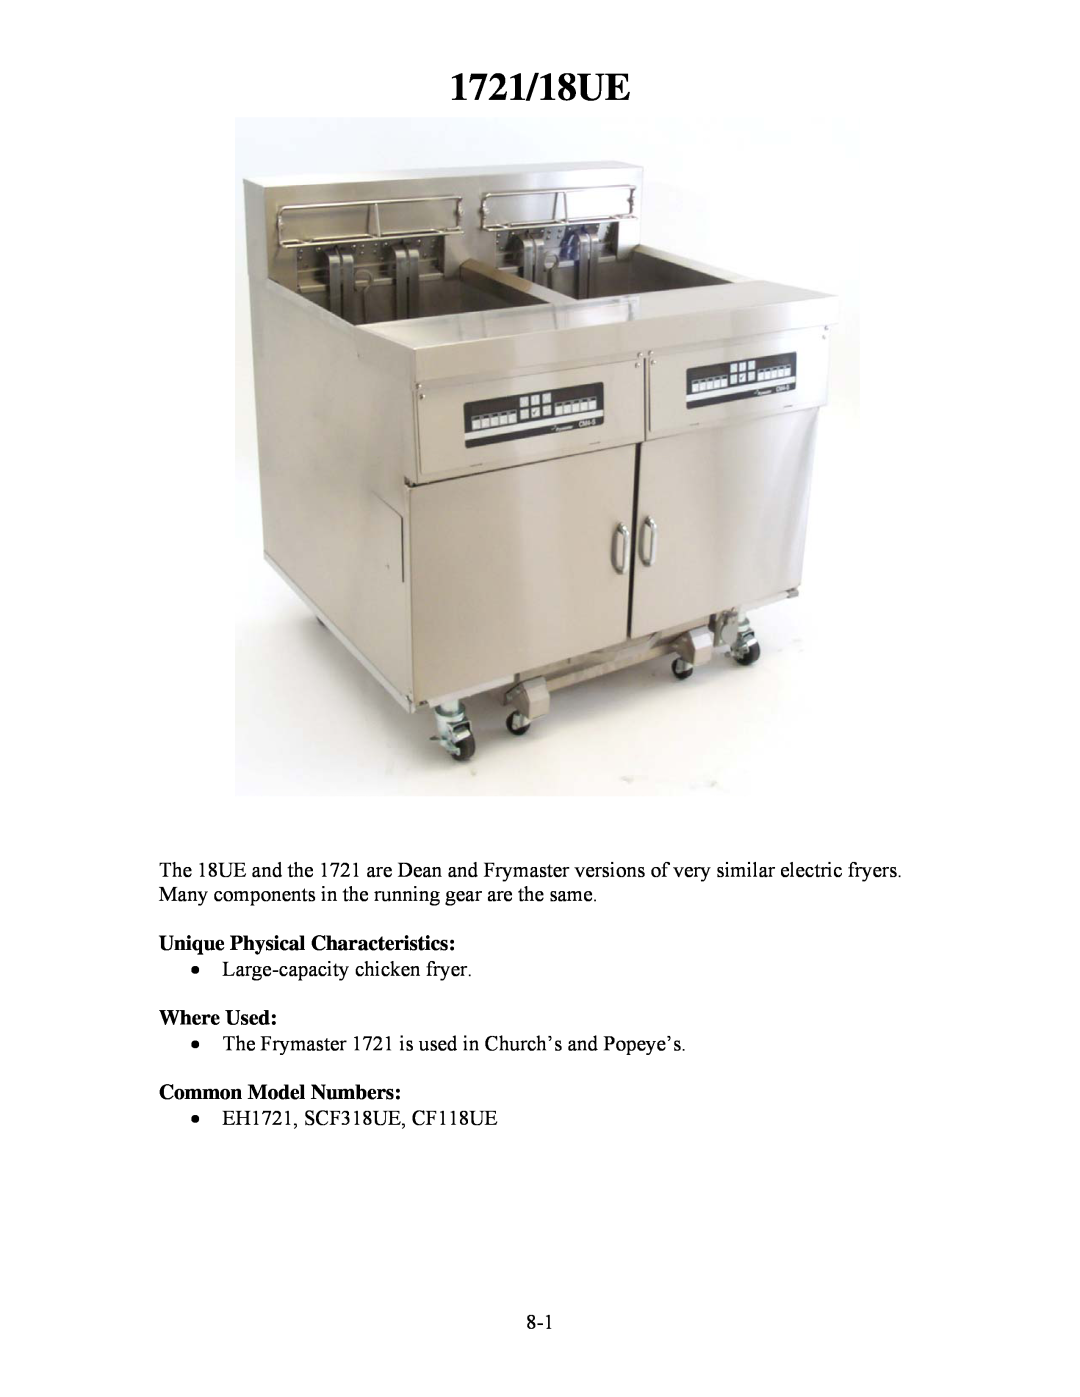 Frymaster H50 1721/18UE, Large-capacity chicken fryer, The Frymaster 1721 is used in Church’s and Popeye’s, Where Used 